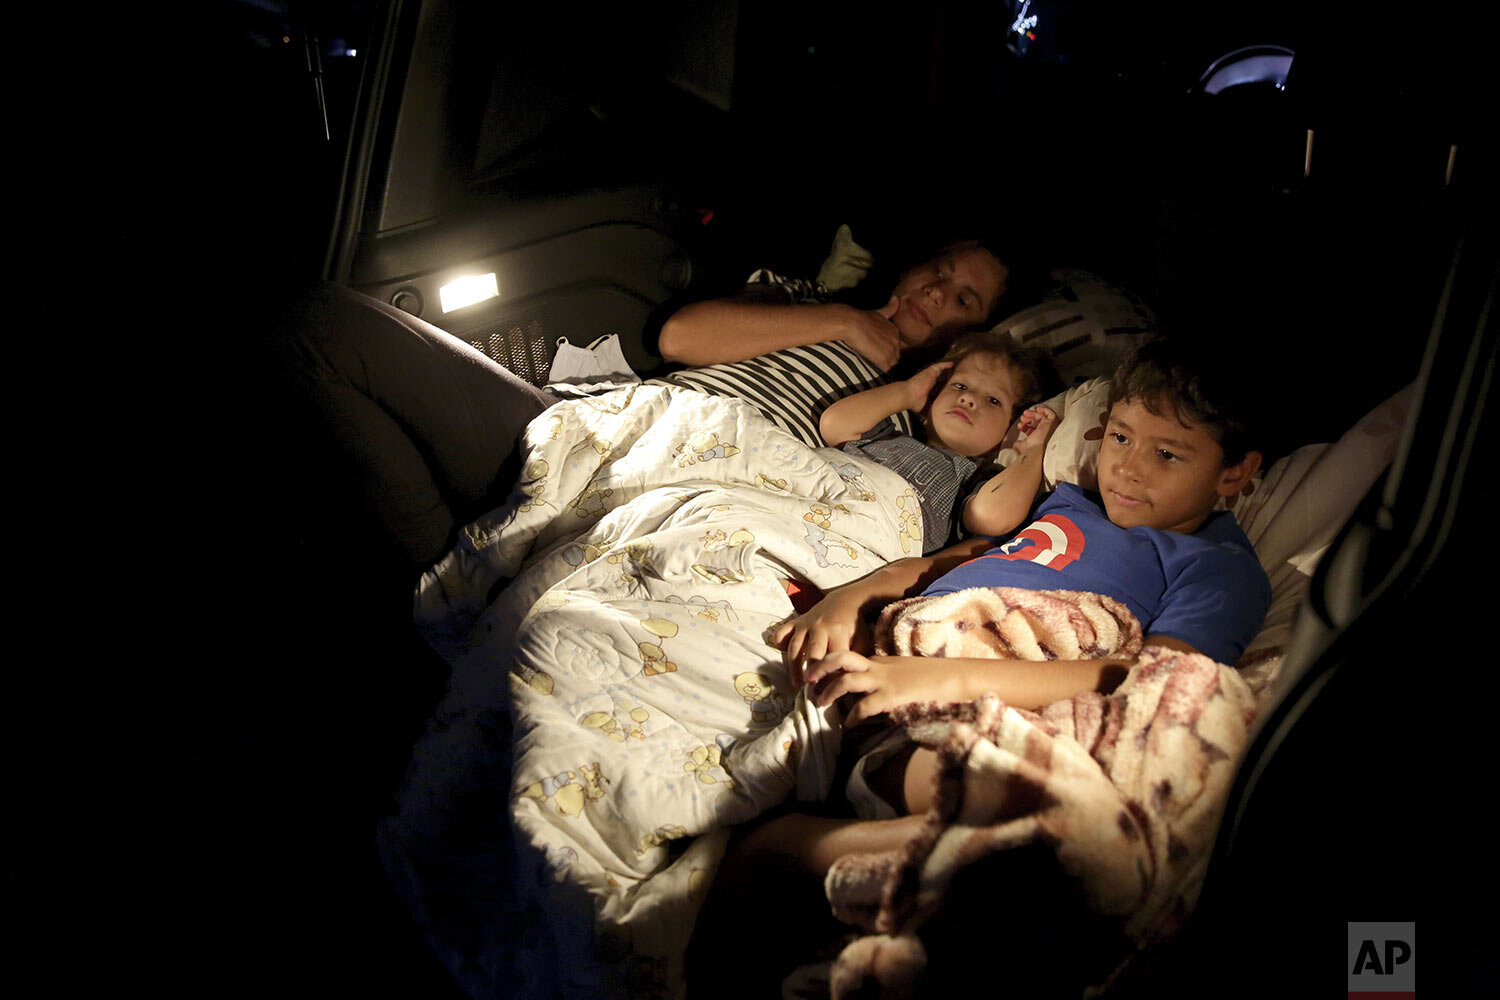  Ana Paula Santos and her children watch a movie from inside their car at a drive-in movie theater where drivers must leave one space empty between them in Brasilia, Brazil, Wednesday, May 13, 2020. (AP Photo/Eraldo Peres) 